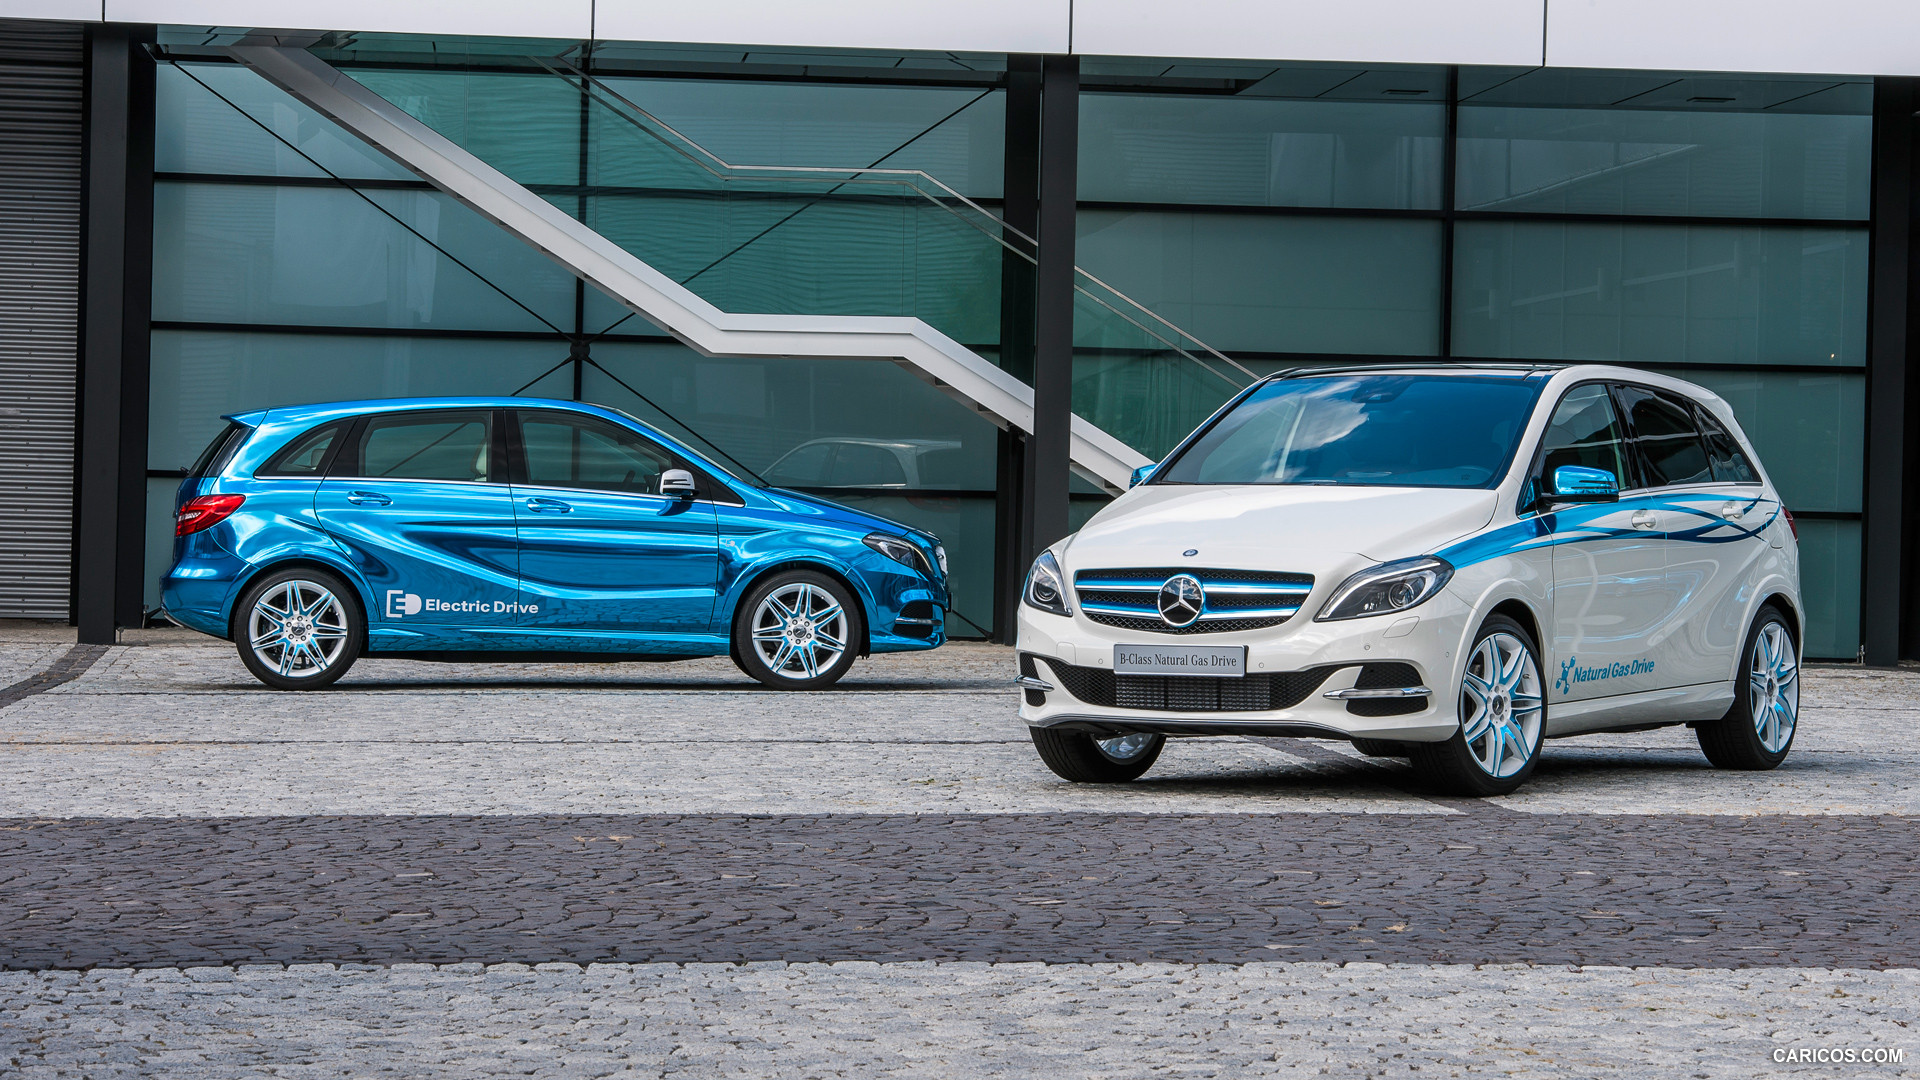 2012 Mercedes-Benz B-Class Electric Drive Concept and B 200 Natural Gas Drive - , #7 of 18